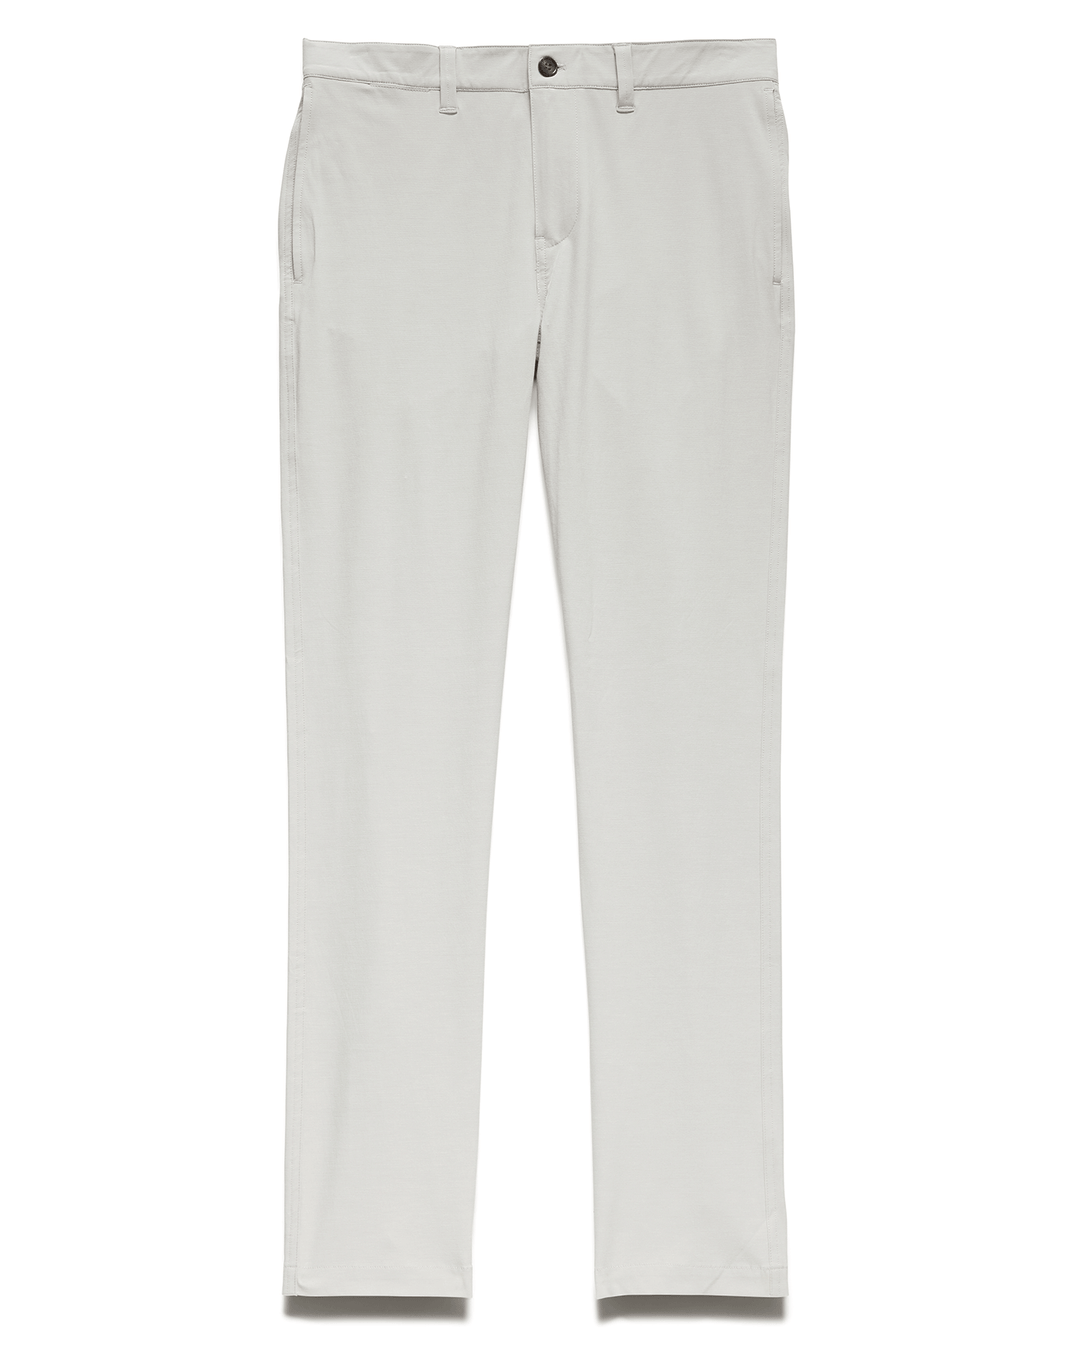 TEXTURED ANY-WEAR PERFORMANCE PANT - NASHVILLE STRAIGHT